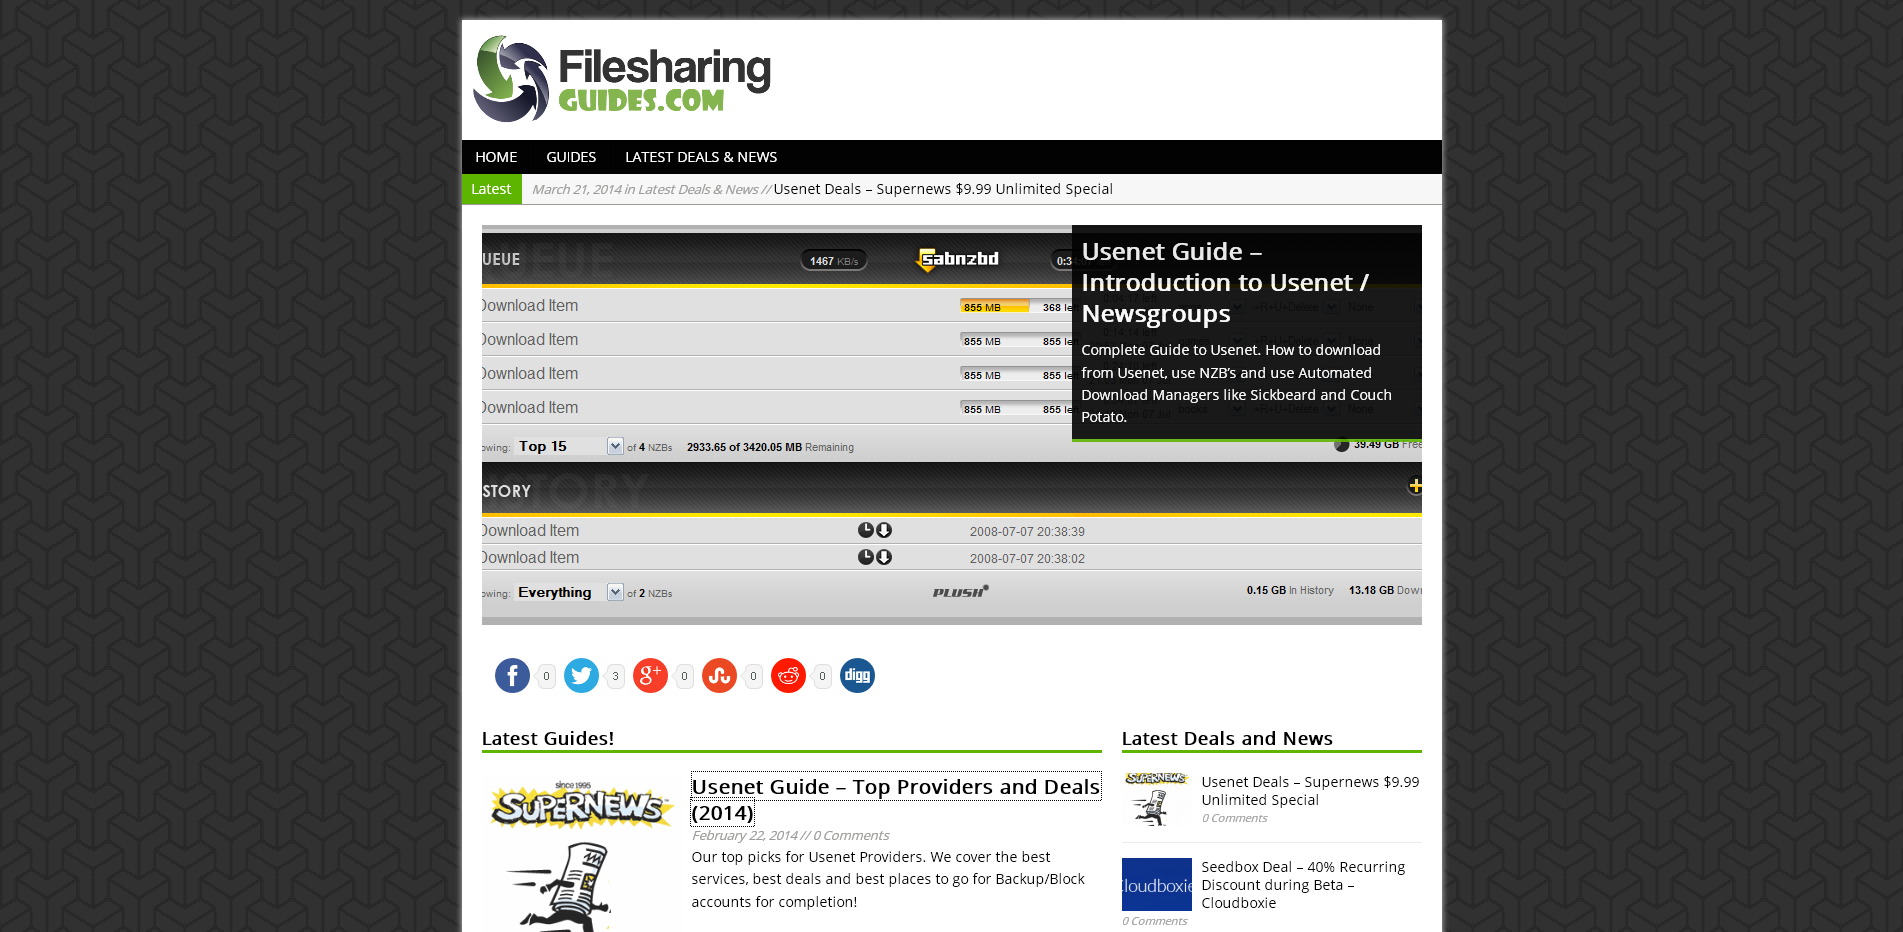 File Sharing Guides_Home_Filesharing_Guides_-_2014-03-23_13.23.50